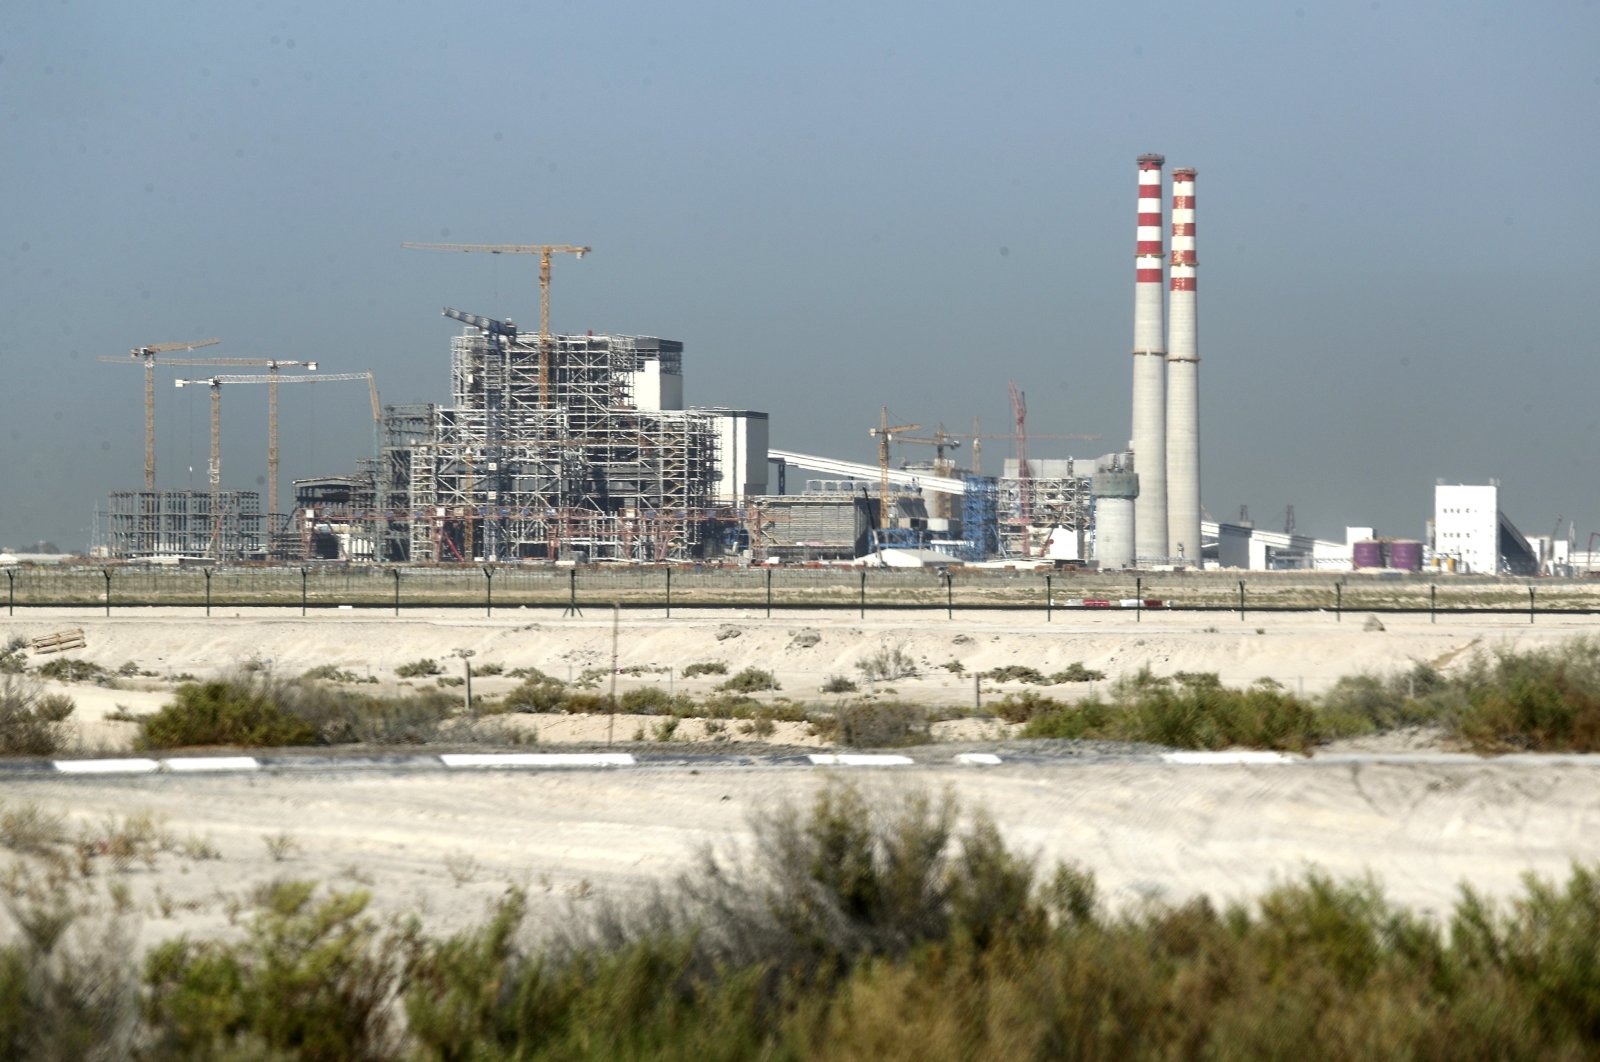 The coal-powered Hassyan power plant is seen under construction in Dubai, the United Arab Emirates, Oct. 14, 2020. (AP Photo)